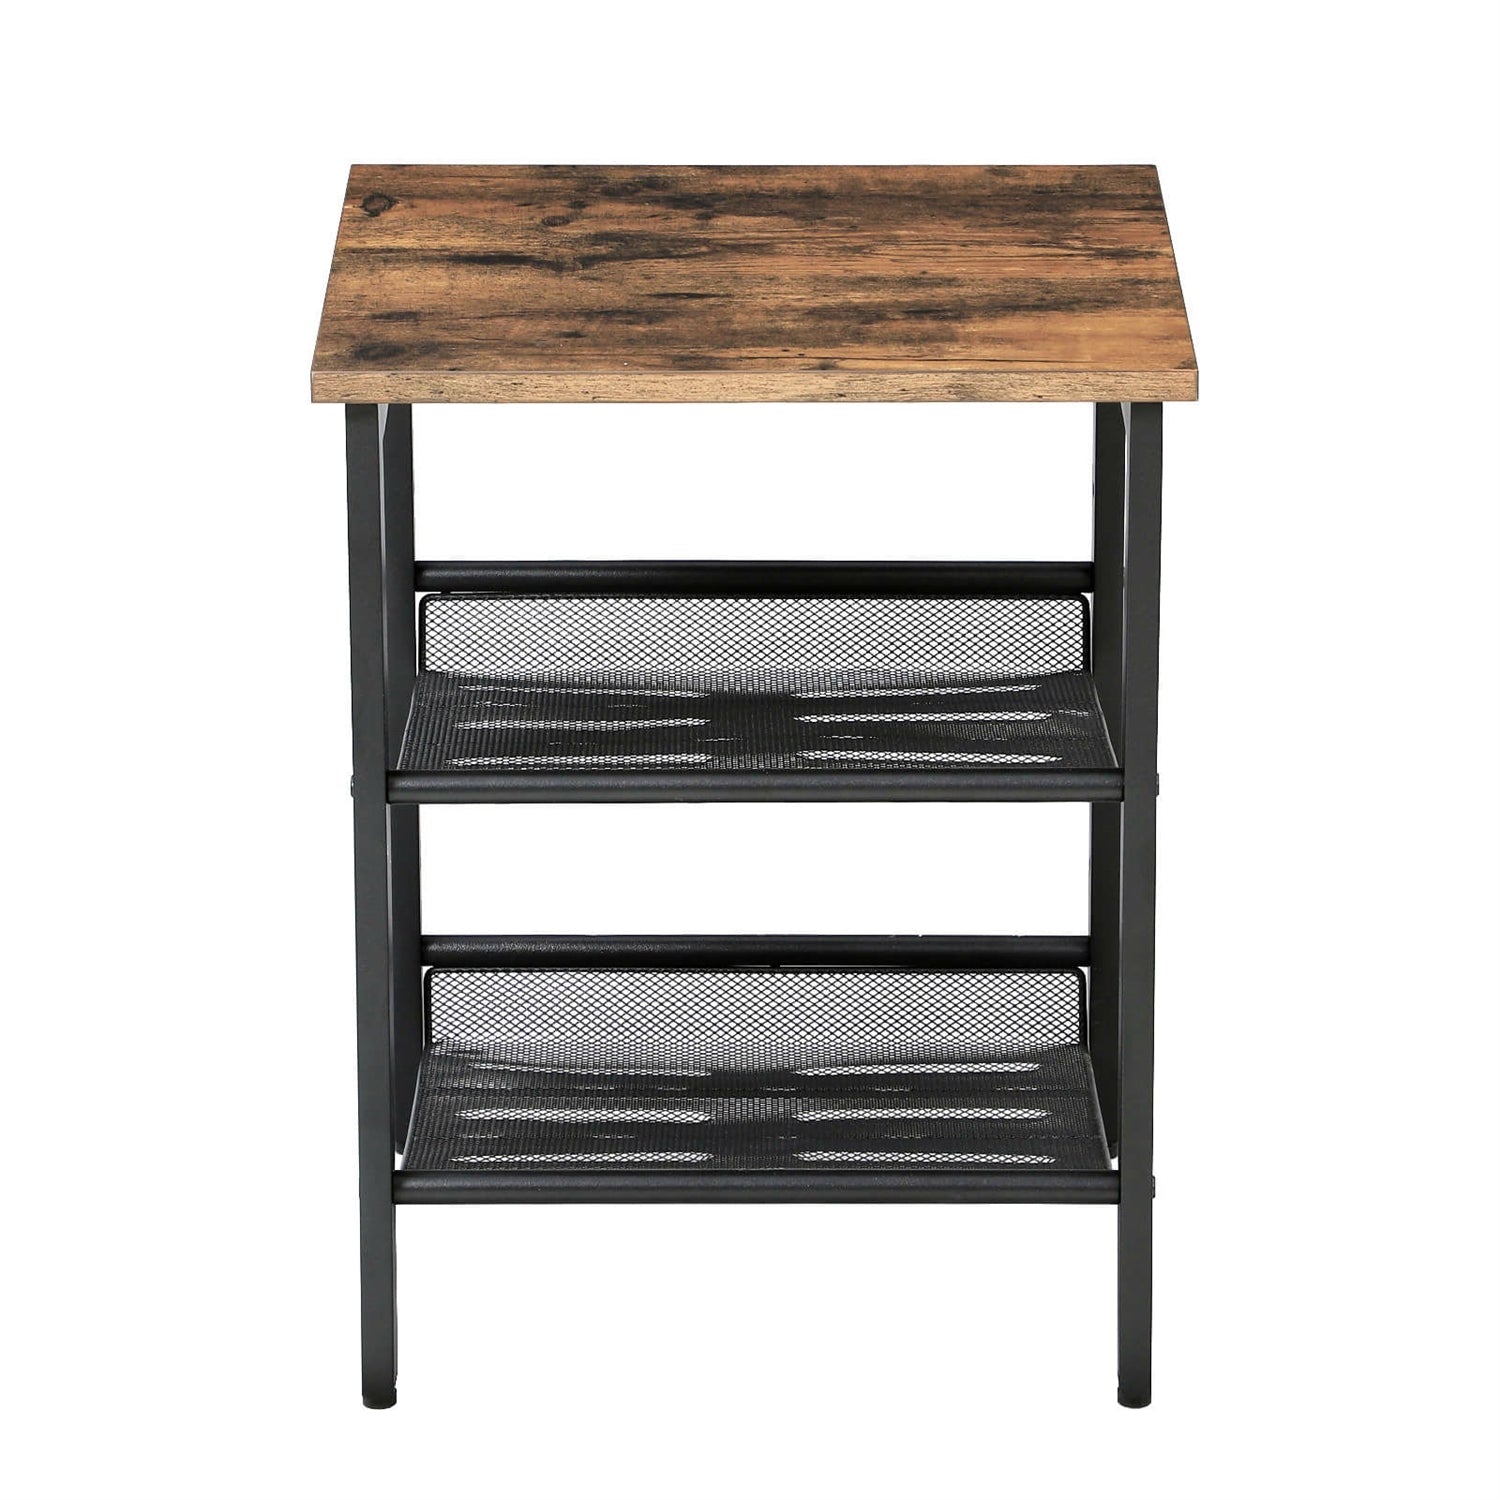 Bedroom > Nightstand And Dressers - Set Of 2 Side Table Nightstand With Medium Wood Finish Top And Mesh Shelves